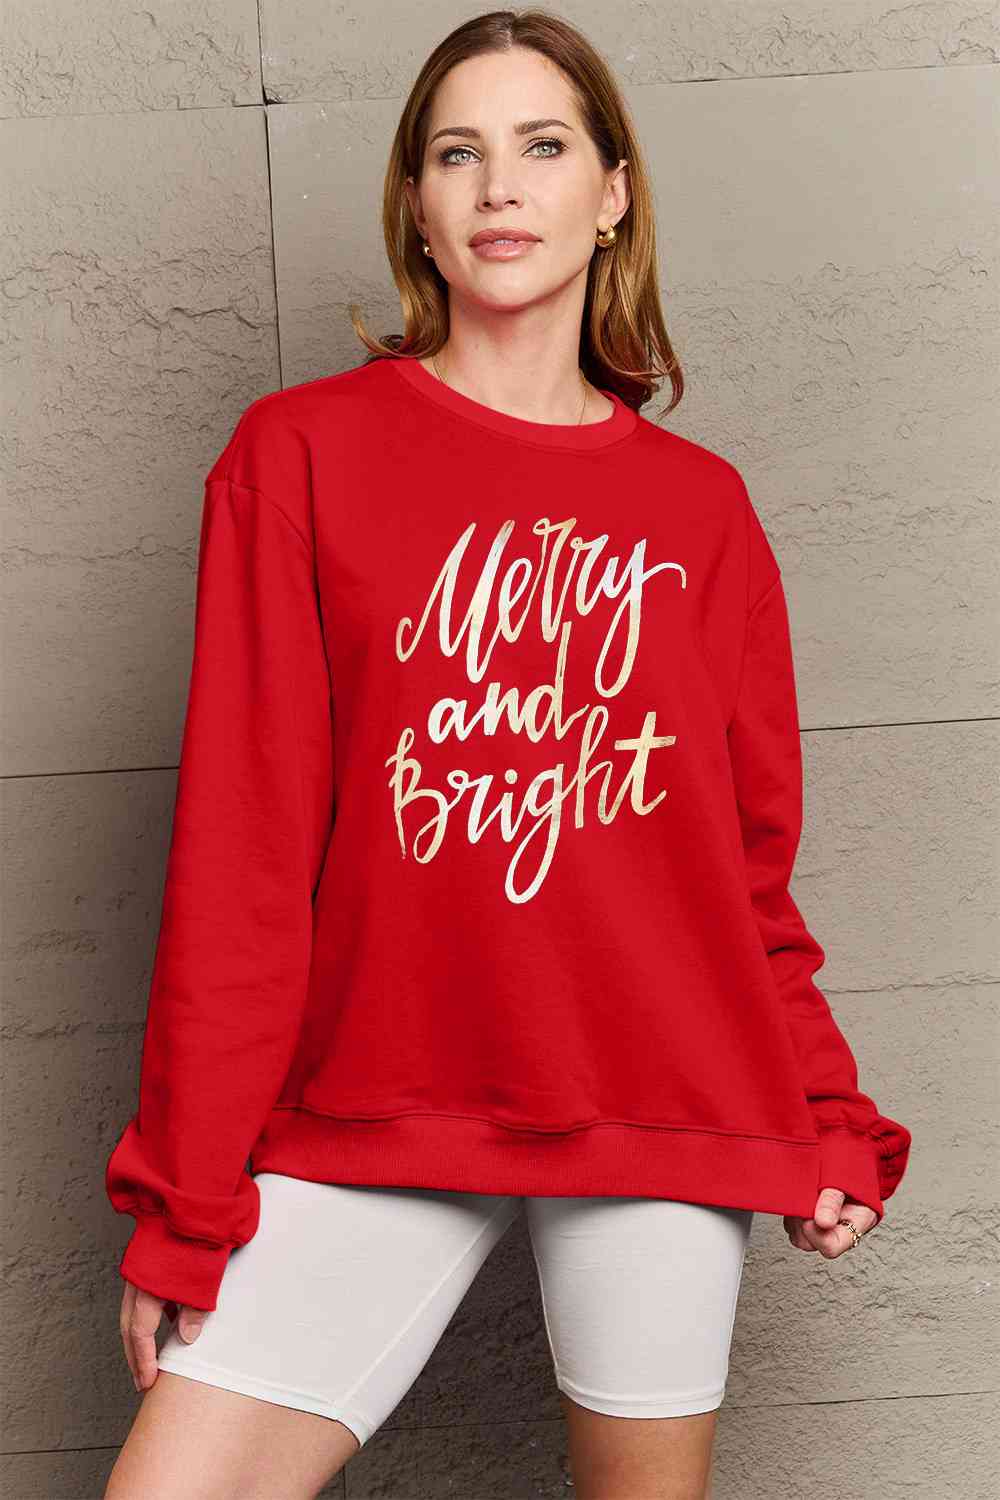 Simply Love Full Size MERRY AND BRIGHT Graphic Sweatshirt BLUE ZONE PLANET